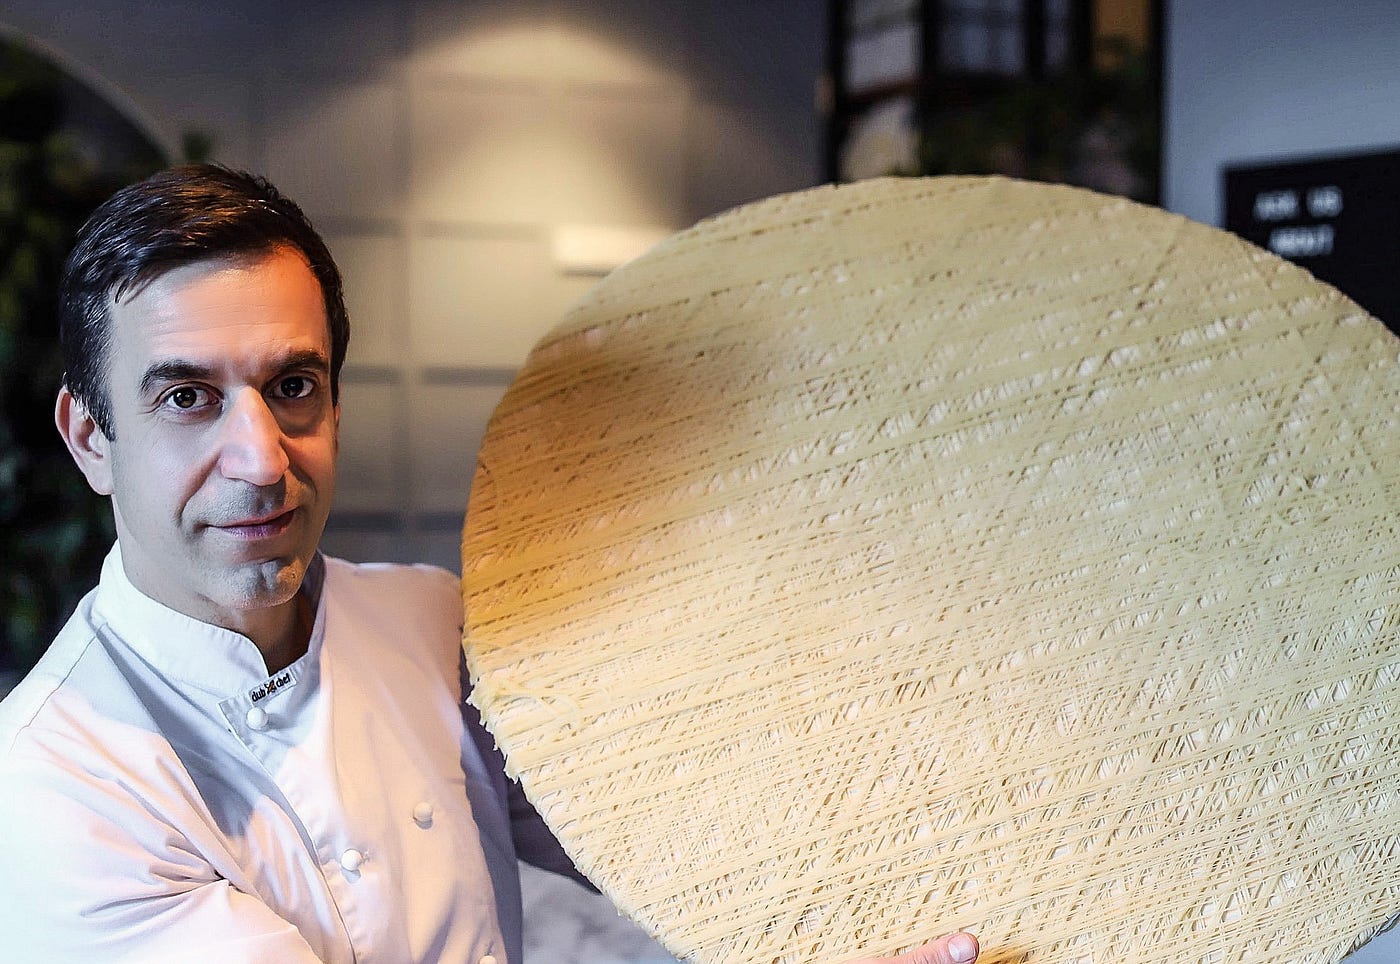 Custodian of one of the rarest pasta varieties in the world